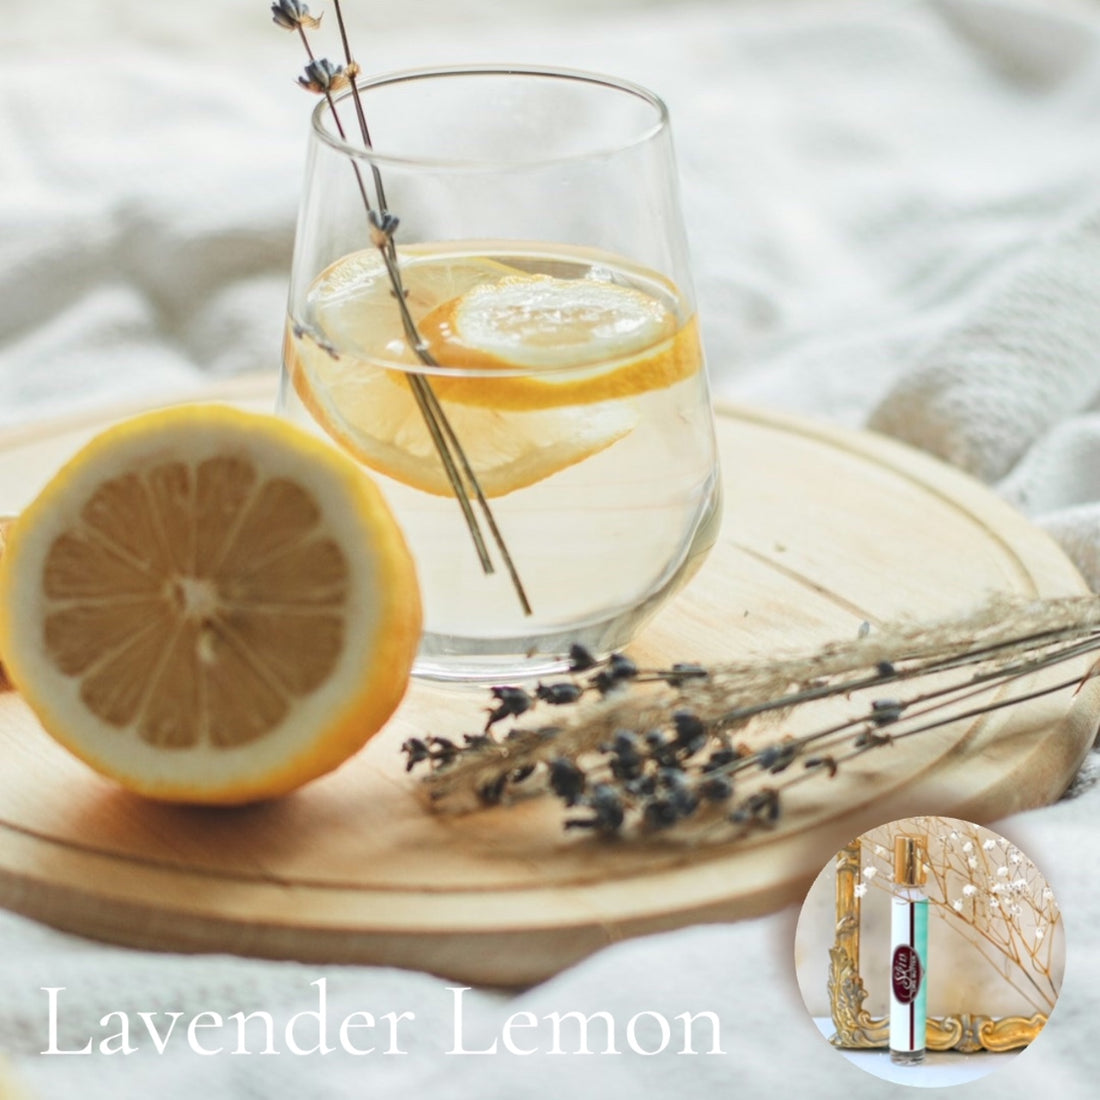 LAVENDER LEMON Roll on Perfume Sale! ~ Buy 1 get one 50% off-use coupon code 2PLEASE